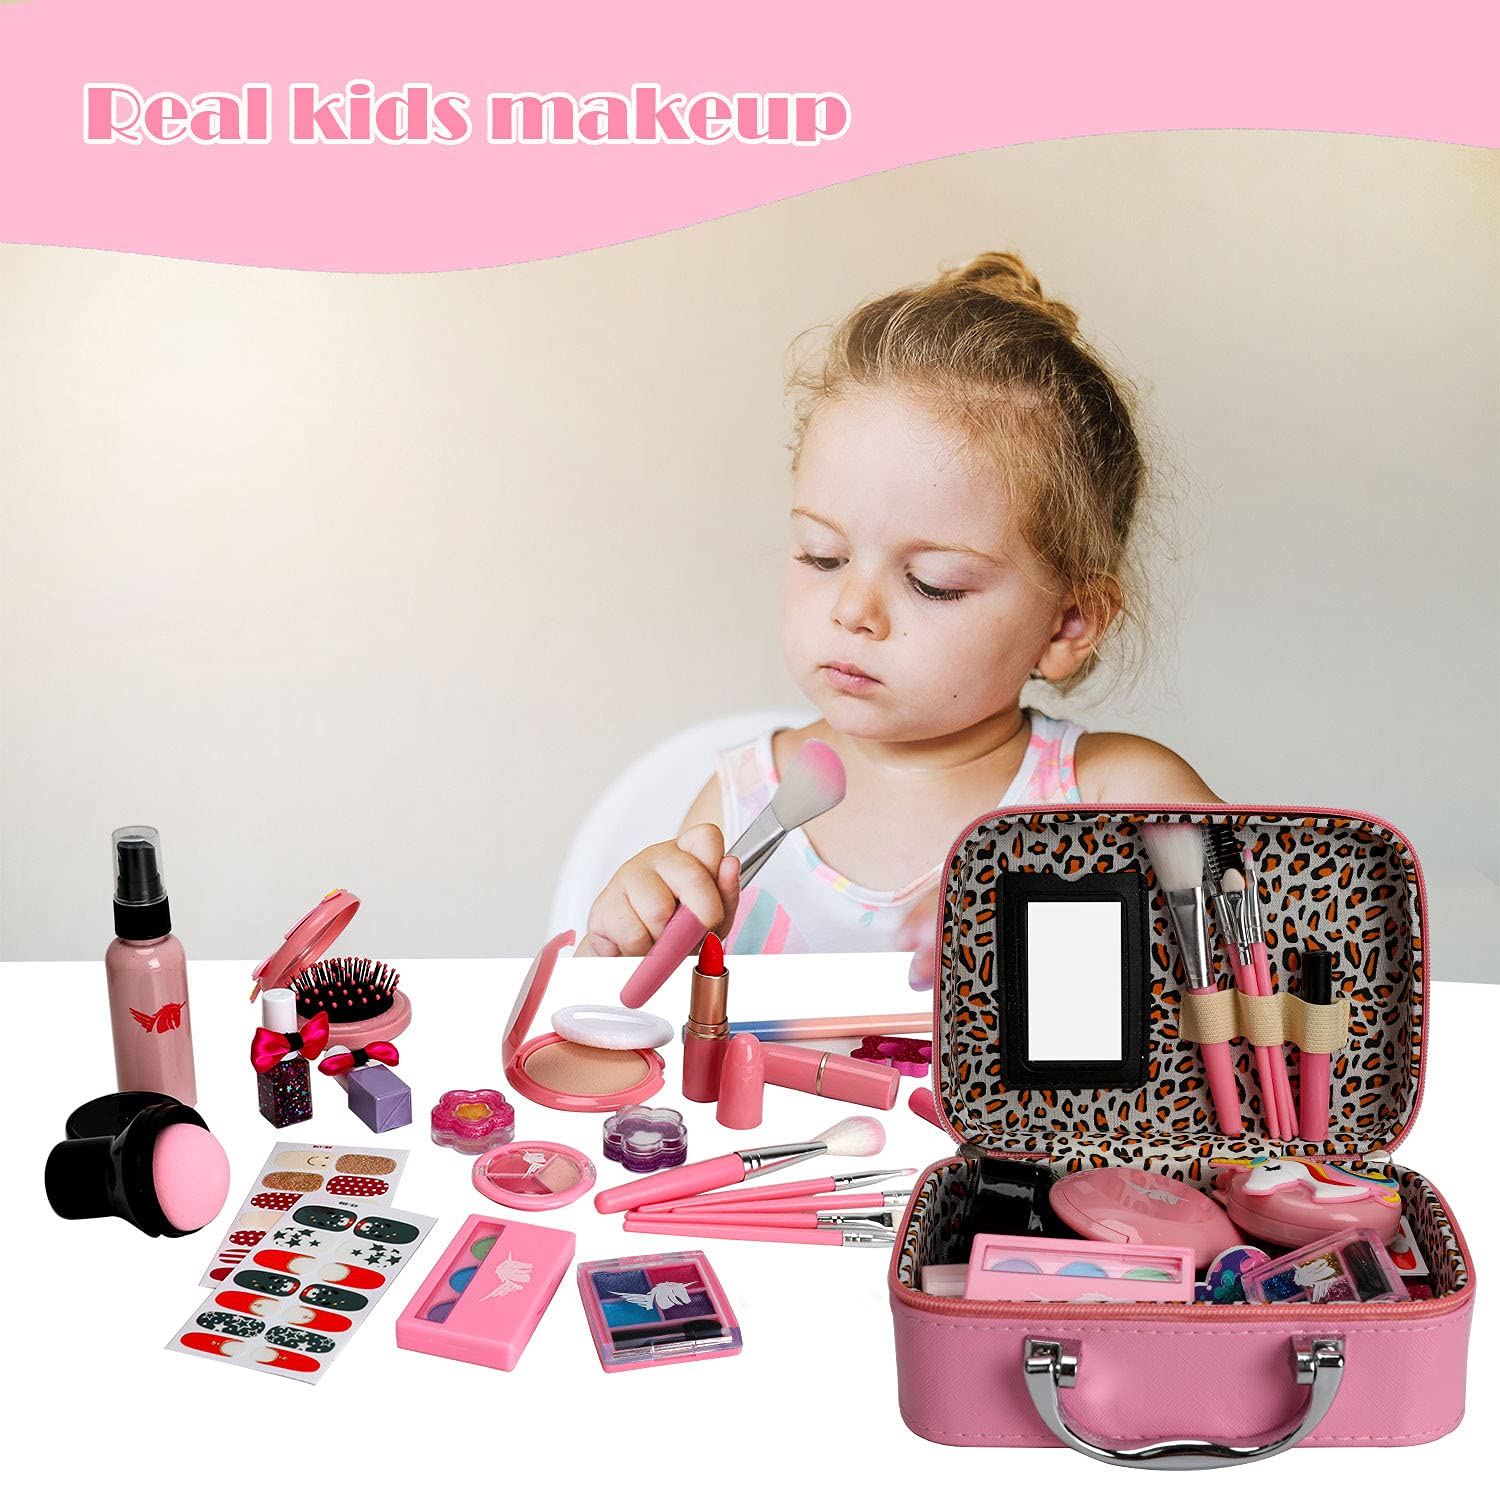 Flybay Kids Makeup Kit for Girls, Real Washable Makeup Set for Girl Children, Princess Play Makeup Toys, Pretend Makeup Kit Christmas Toys Gifts with Cosmetic Case for 4 5 6 7 8 Years Old Girls